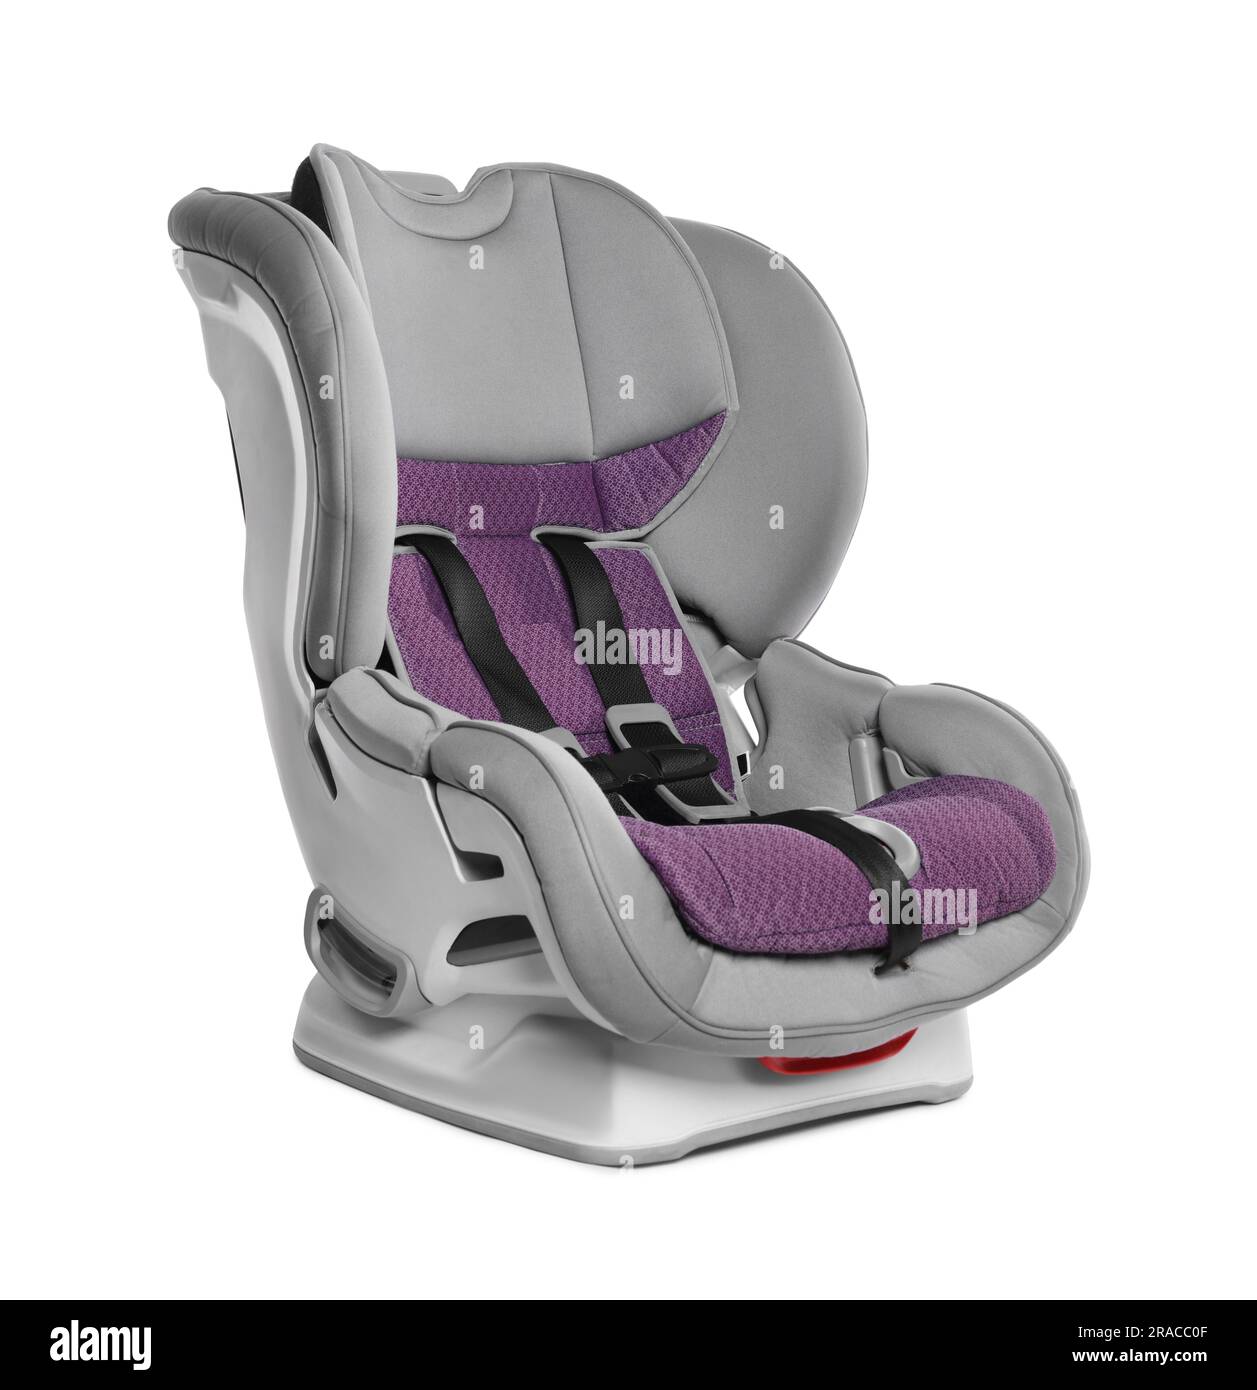 Cybex Cloud Z i-size infant car seat cut out isolated on white background  Stock Photo - Alamy